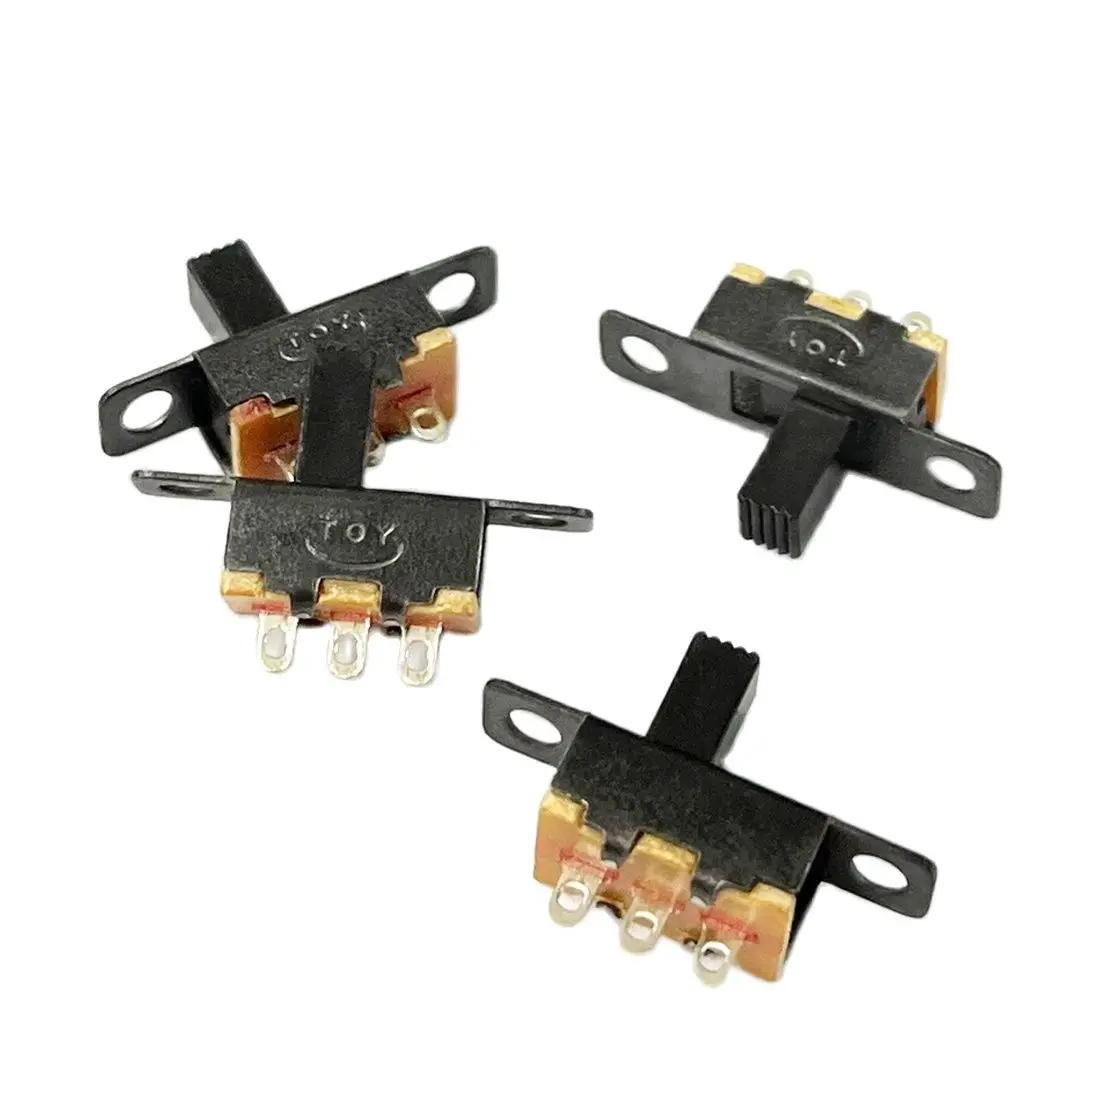 

100pcs On-off Slide Switch Mounting Switches Mini Micro Electronic Button 3 pins 2 Positions Tansverse Handle Key Wholesale